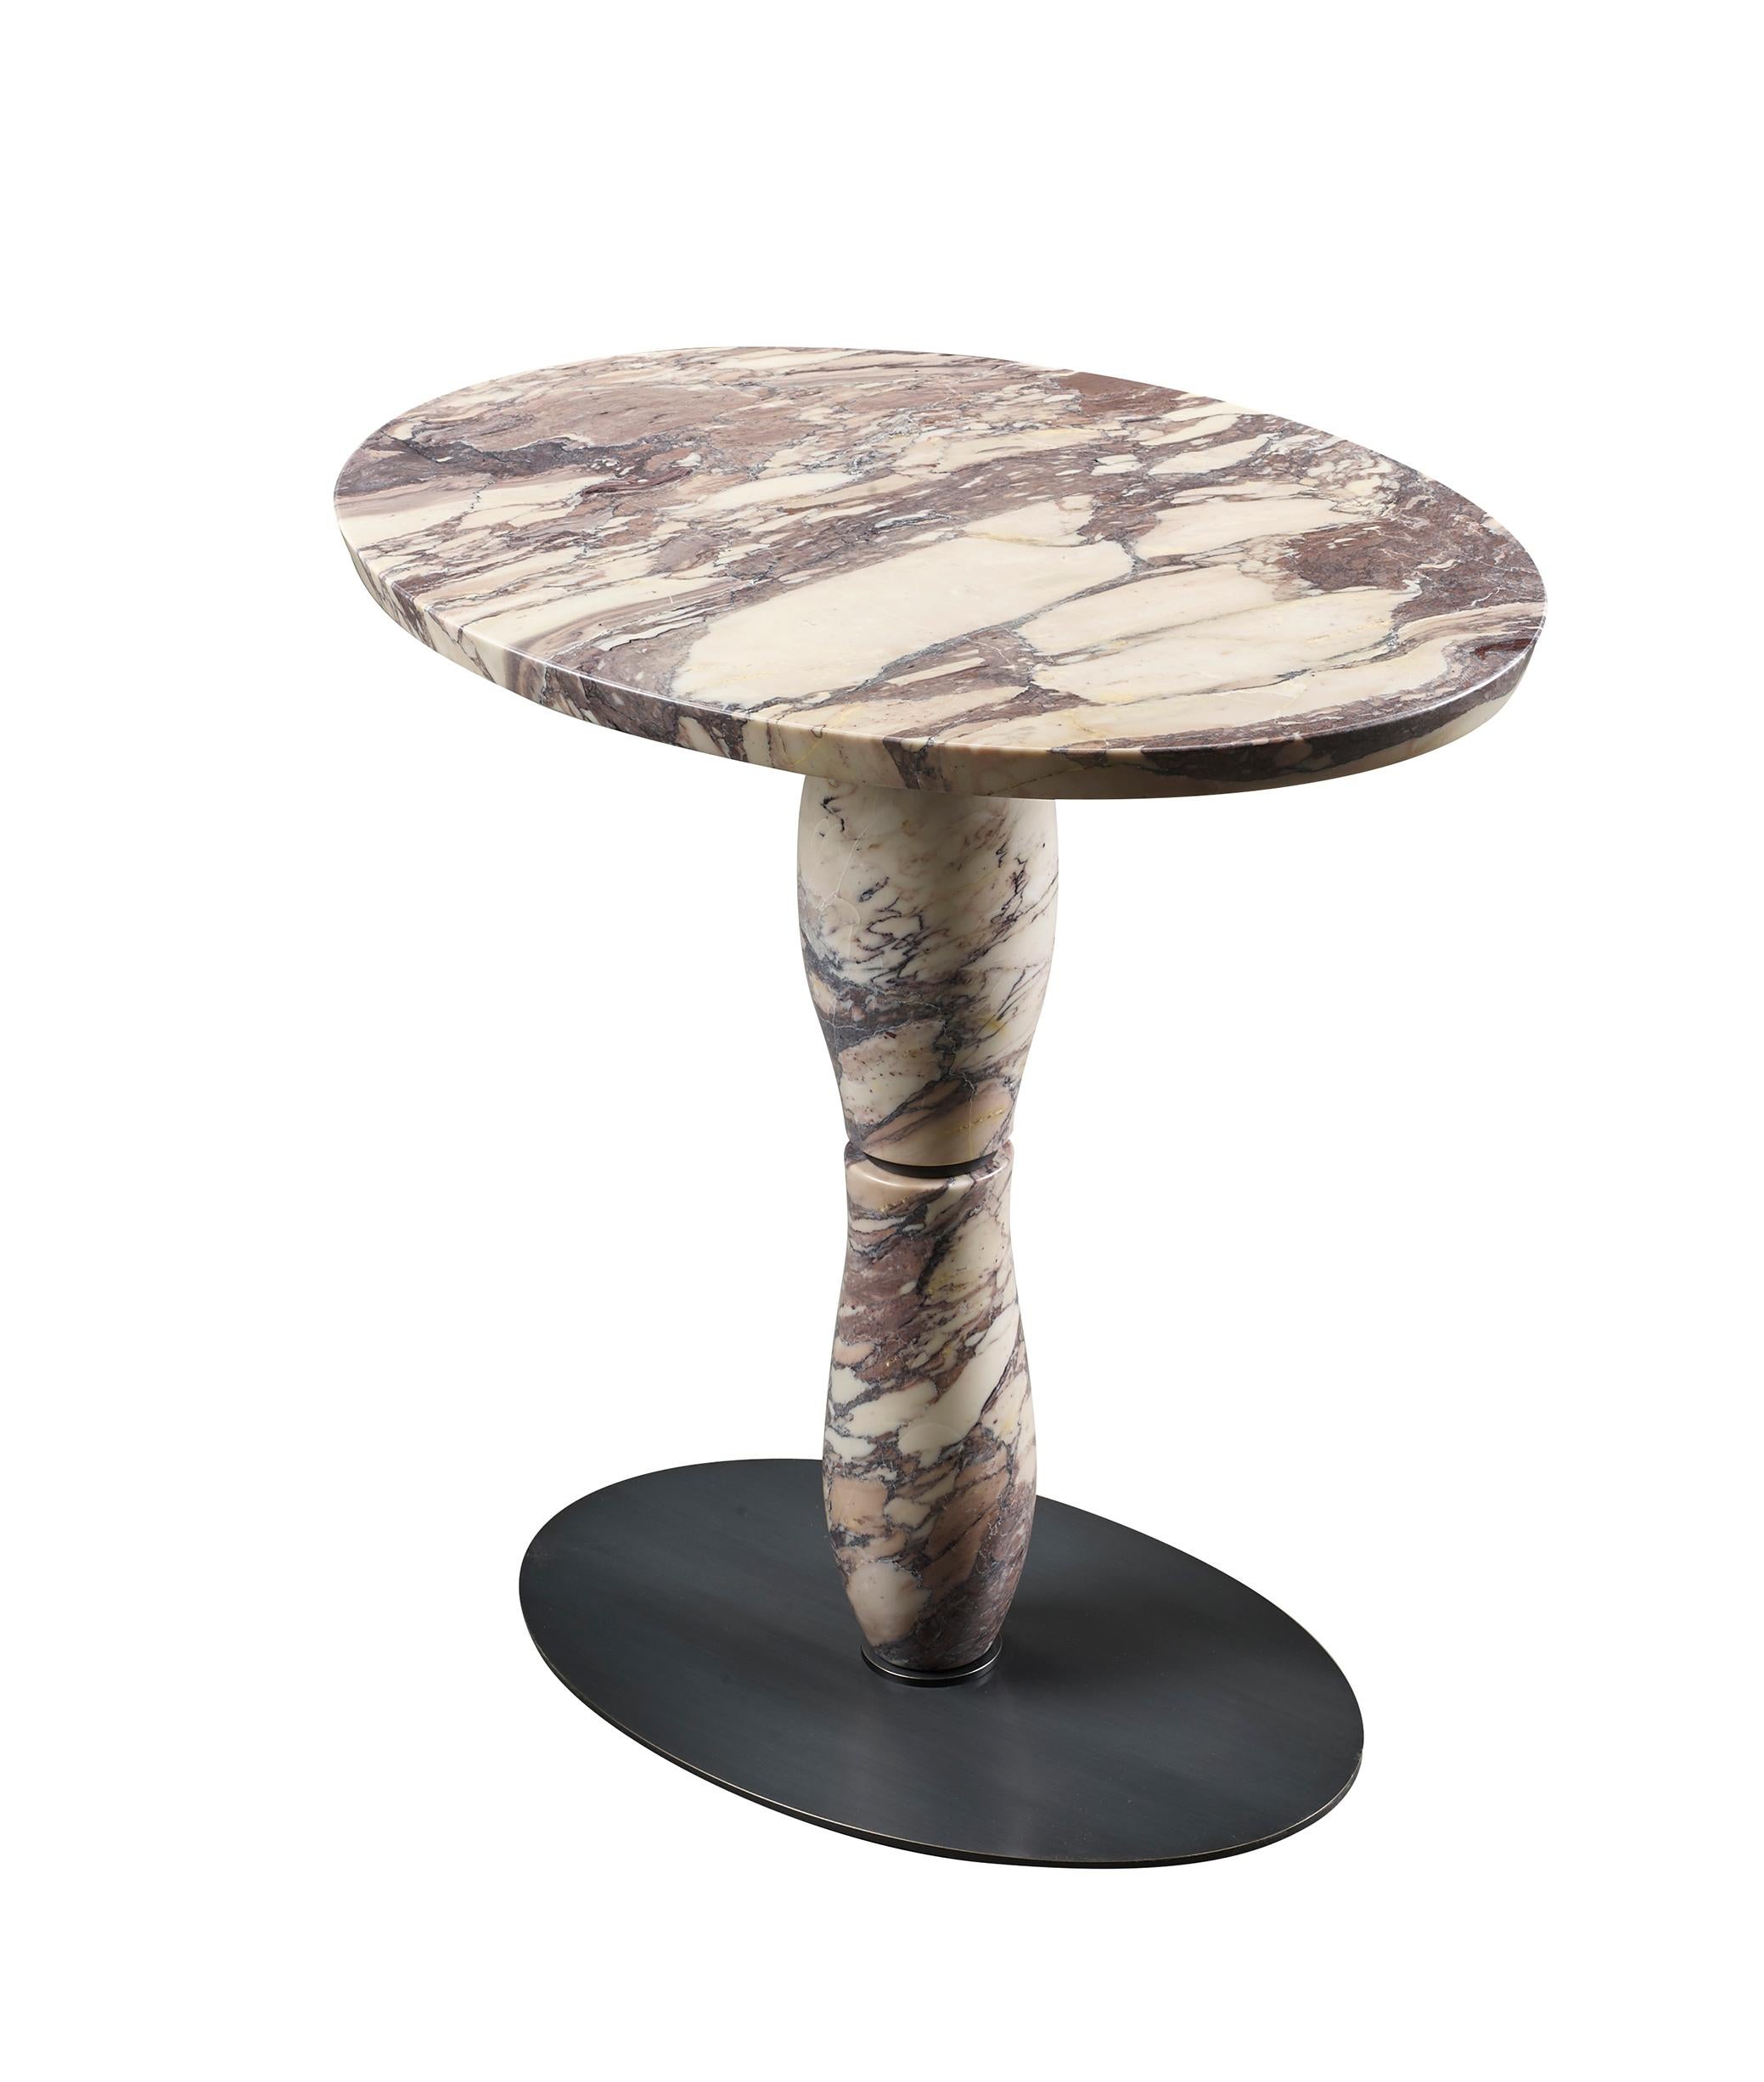 Mediterranée small table belongs to the Capsule collection by Olivier Gagnère, a French designer with an eclectic soul. The table has base in smooth dark bronze, top and leg in Breccia Medicea marble. Also available with top and leg in Nero